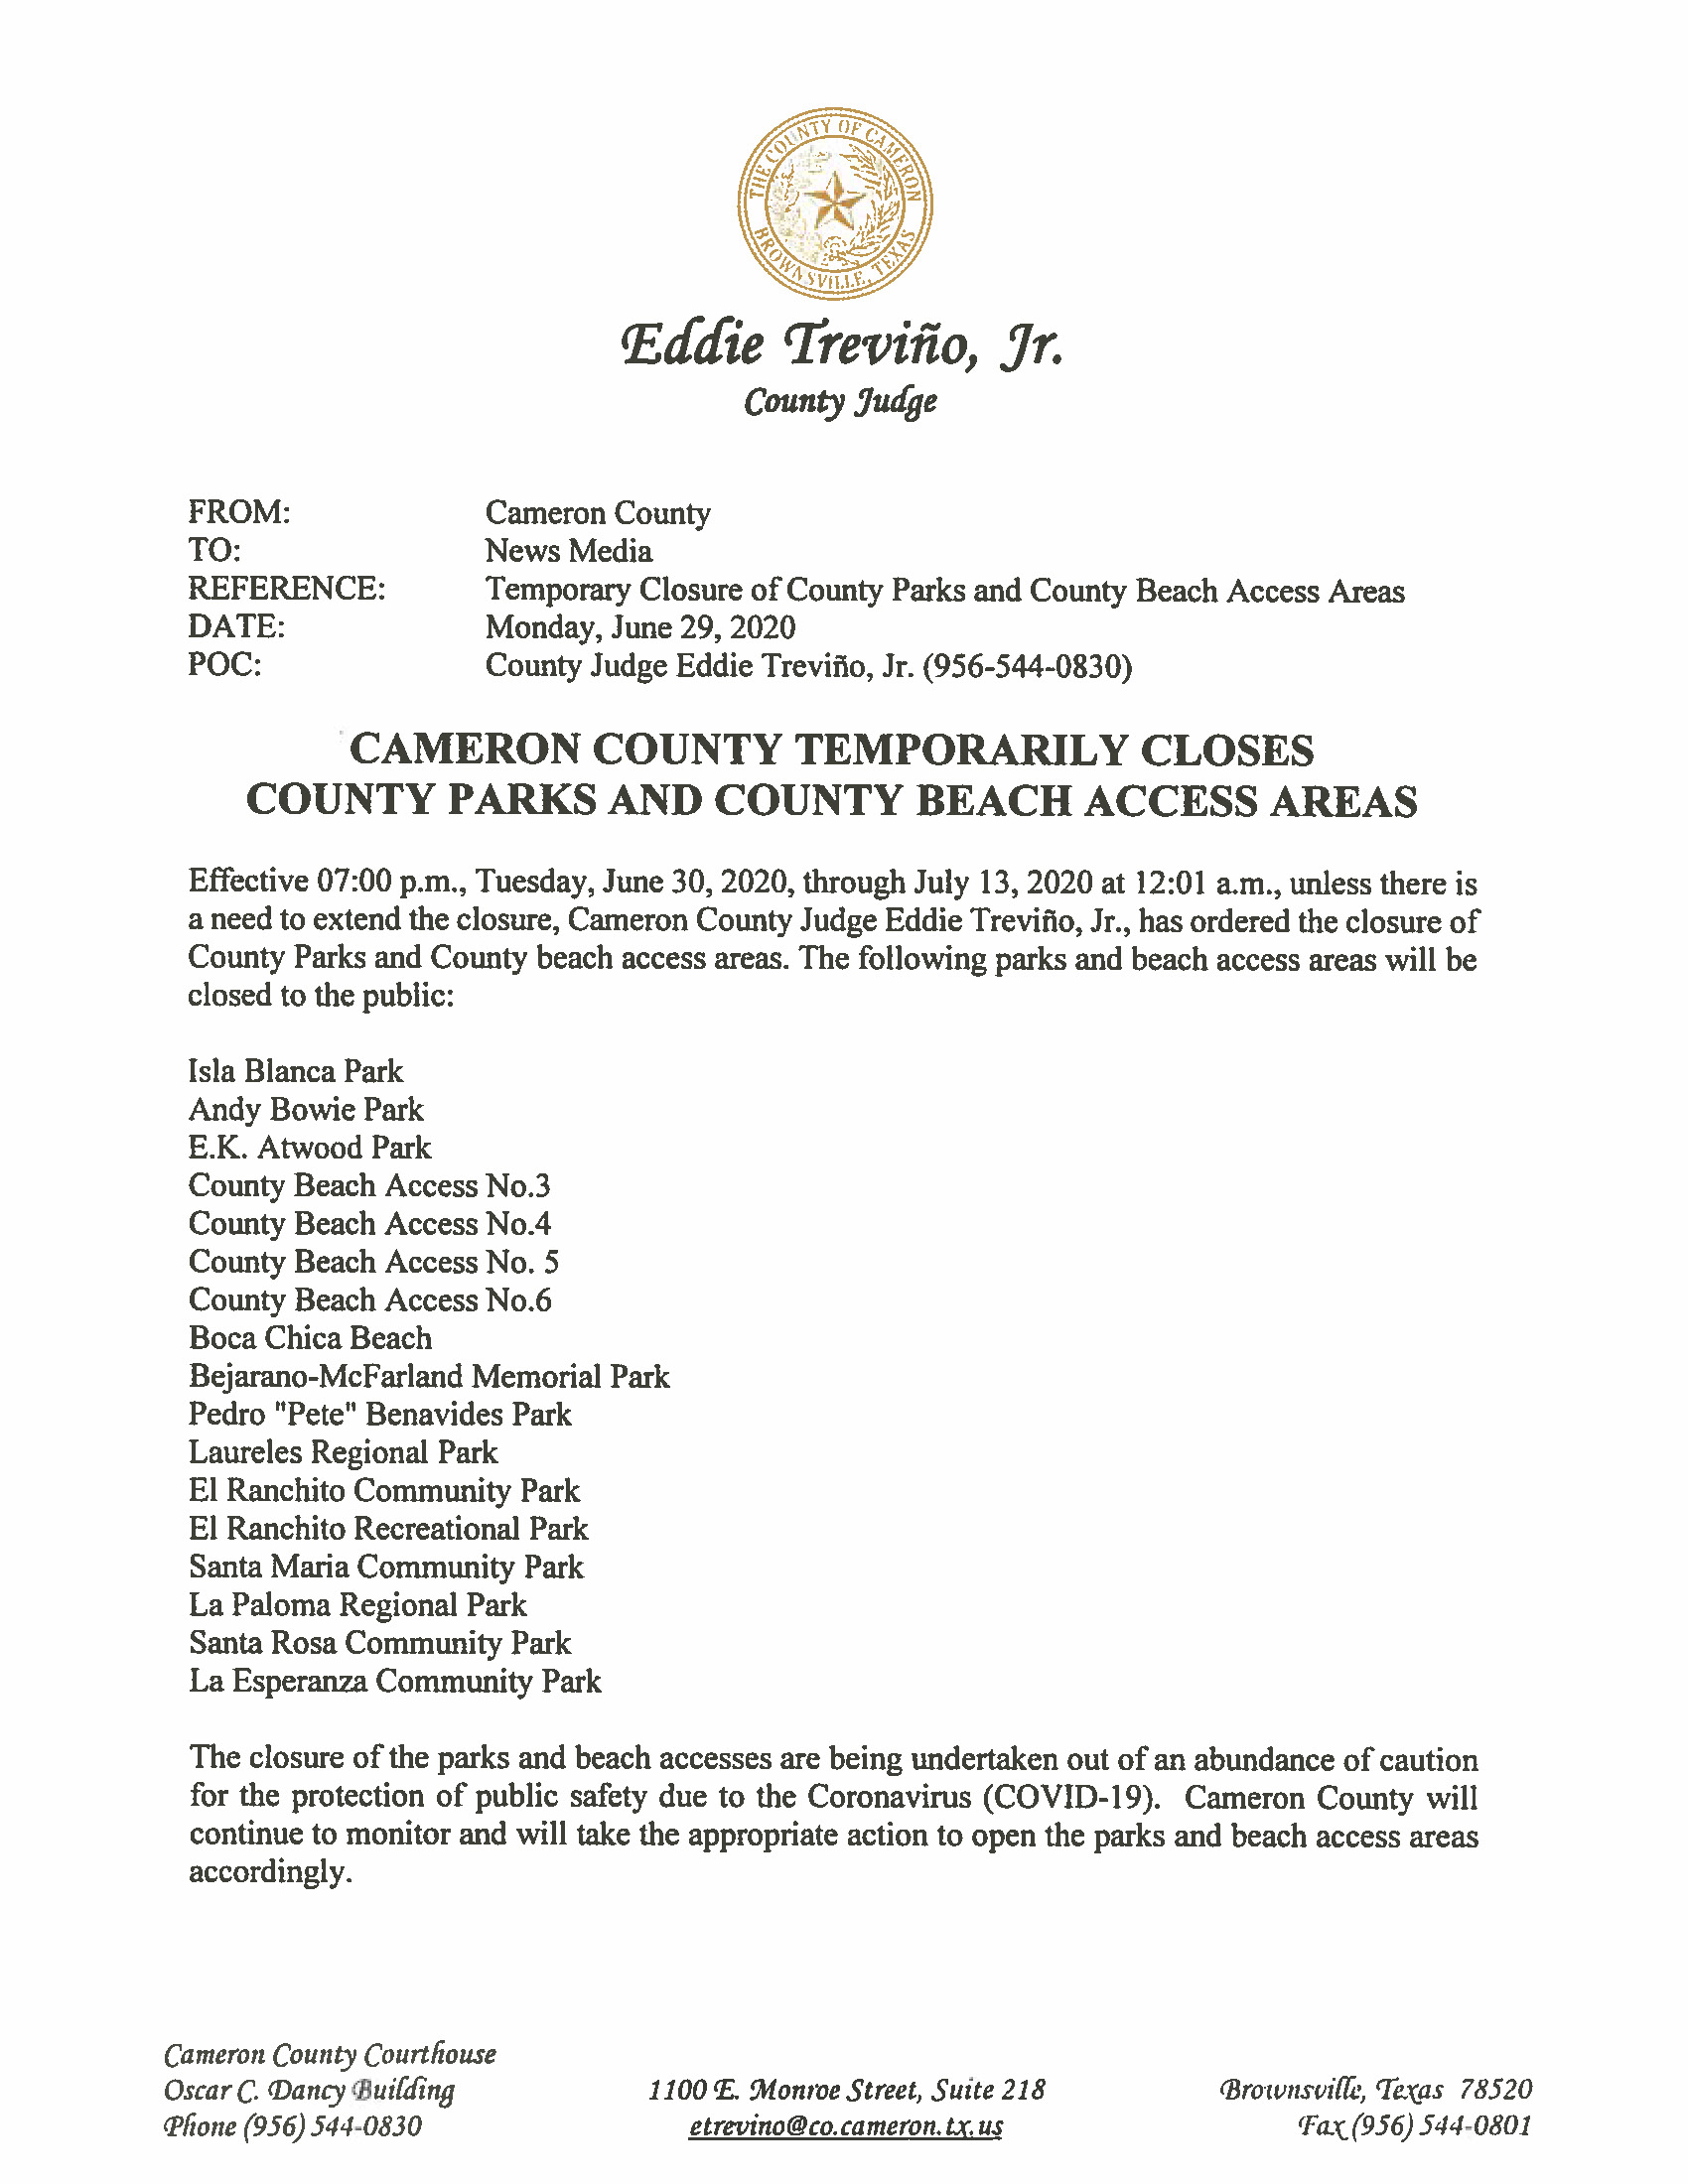 06.29.2020 Cameron County Temporarily Closes County Parks And County Beach Access Areas Page 1